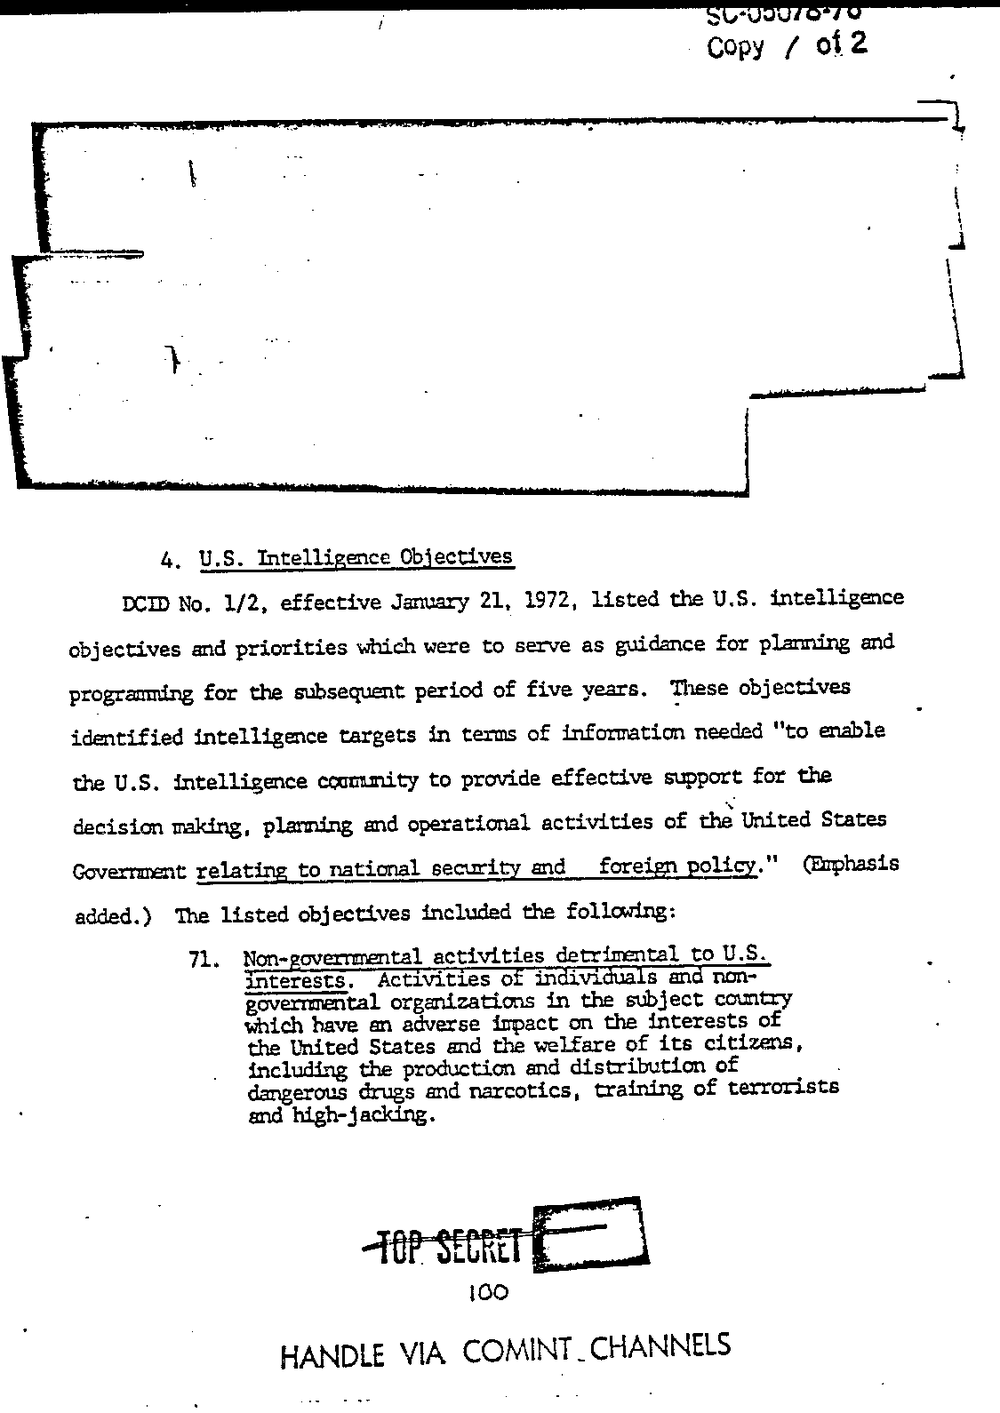 Page 108 from Report on Inquiry Into CIA Related Electronic Surveillance Activities